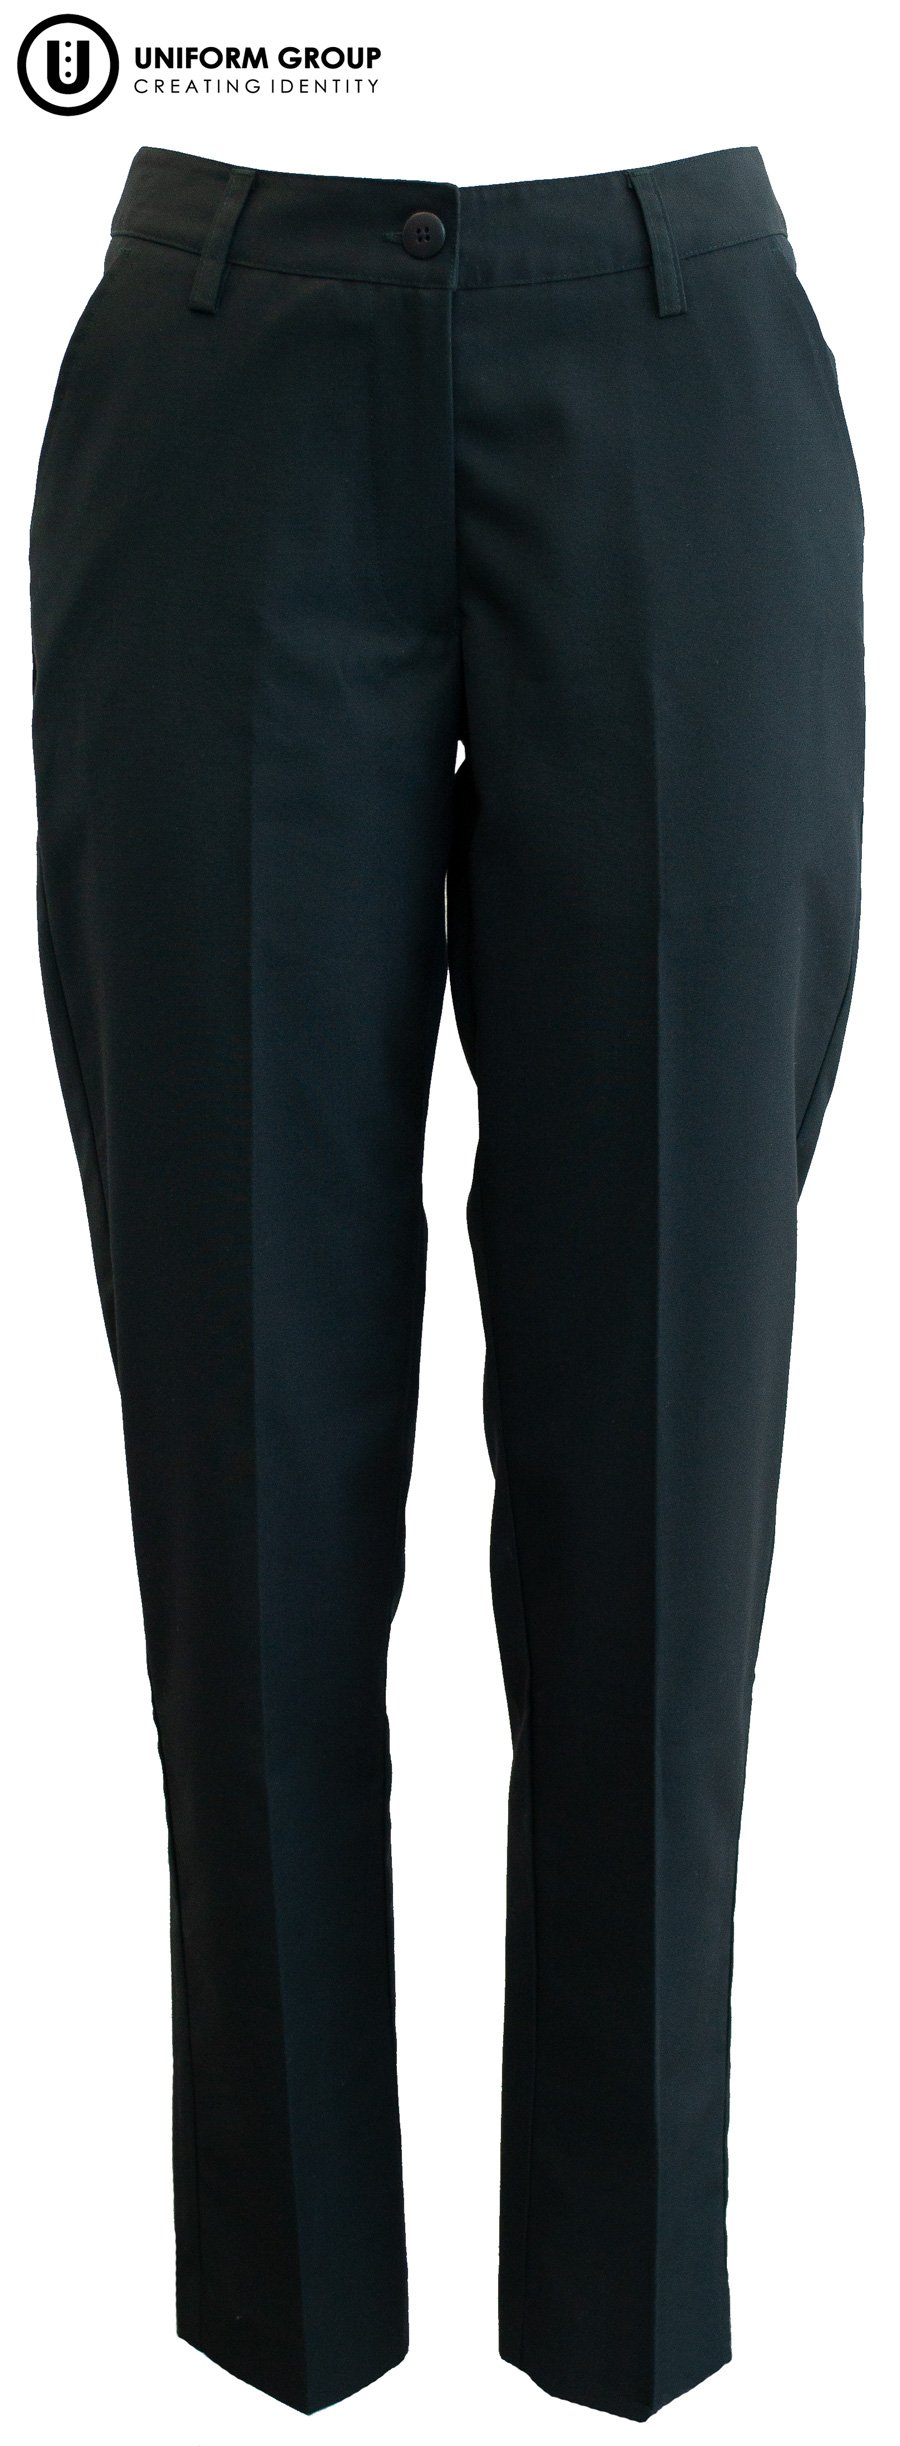 Louis Philippe Trousers & Chinos, Louis Philippe Black Slim Fit Milano  Cotton Trousers for Men at Louisphilippe.com